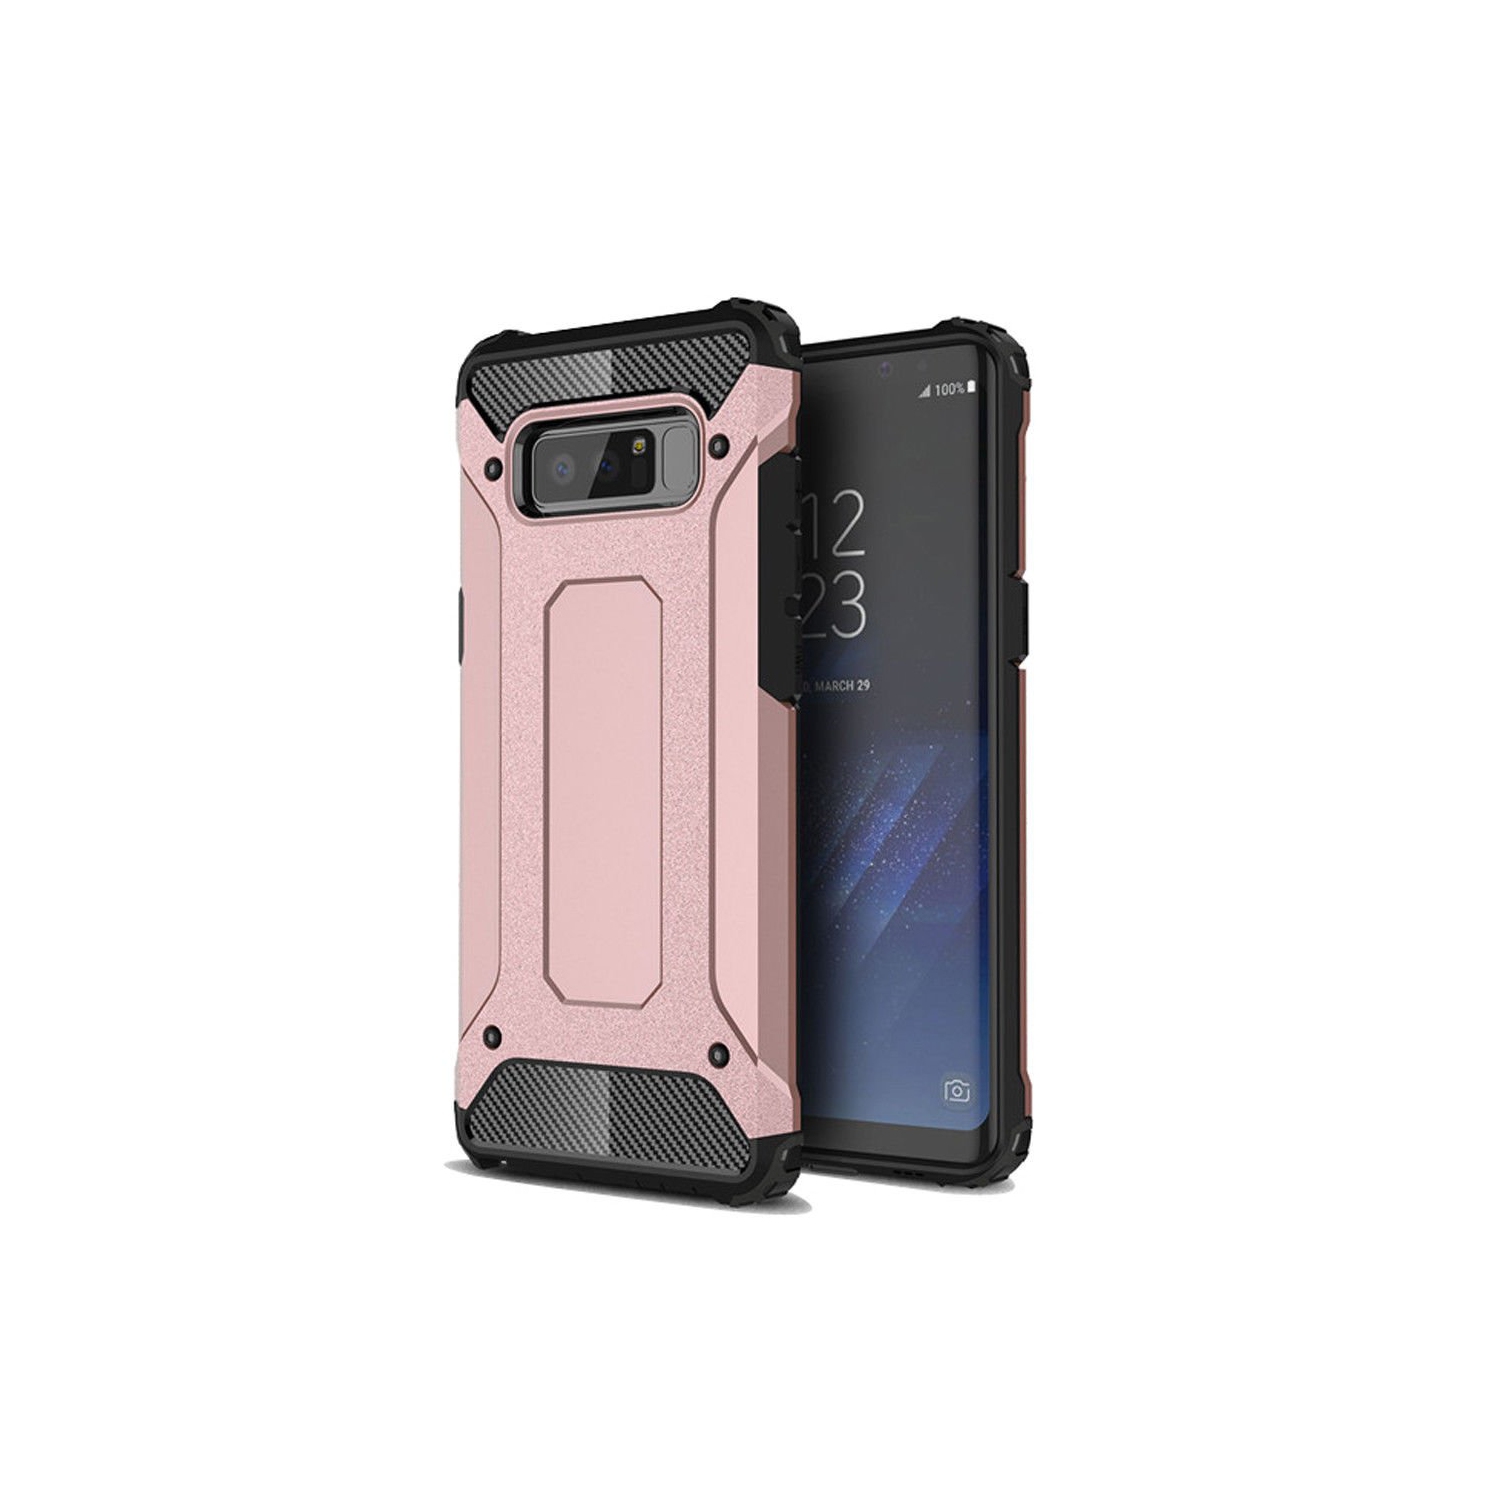 Hybrid Armor Shockproof Rugged Bumper Case For SAMSUNG Galaxy S8 Plus (Rose Gold)